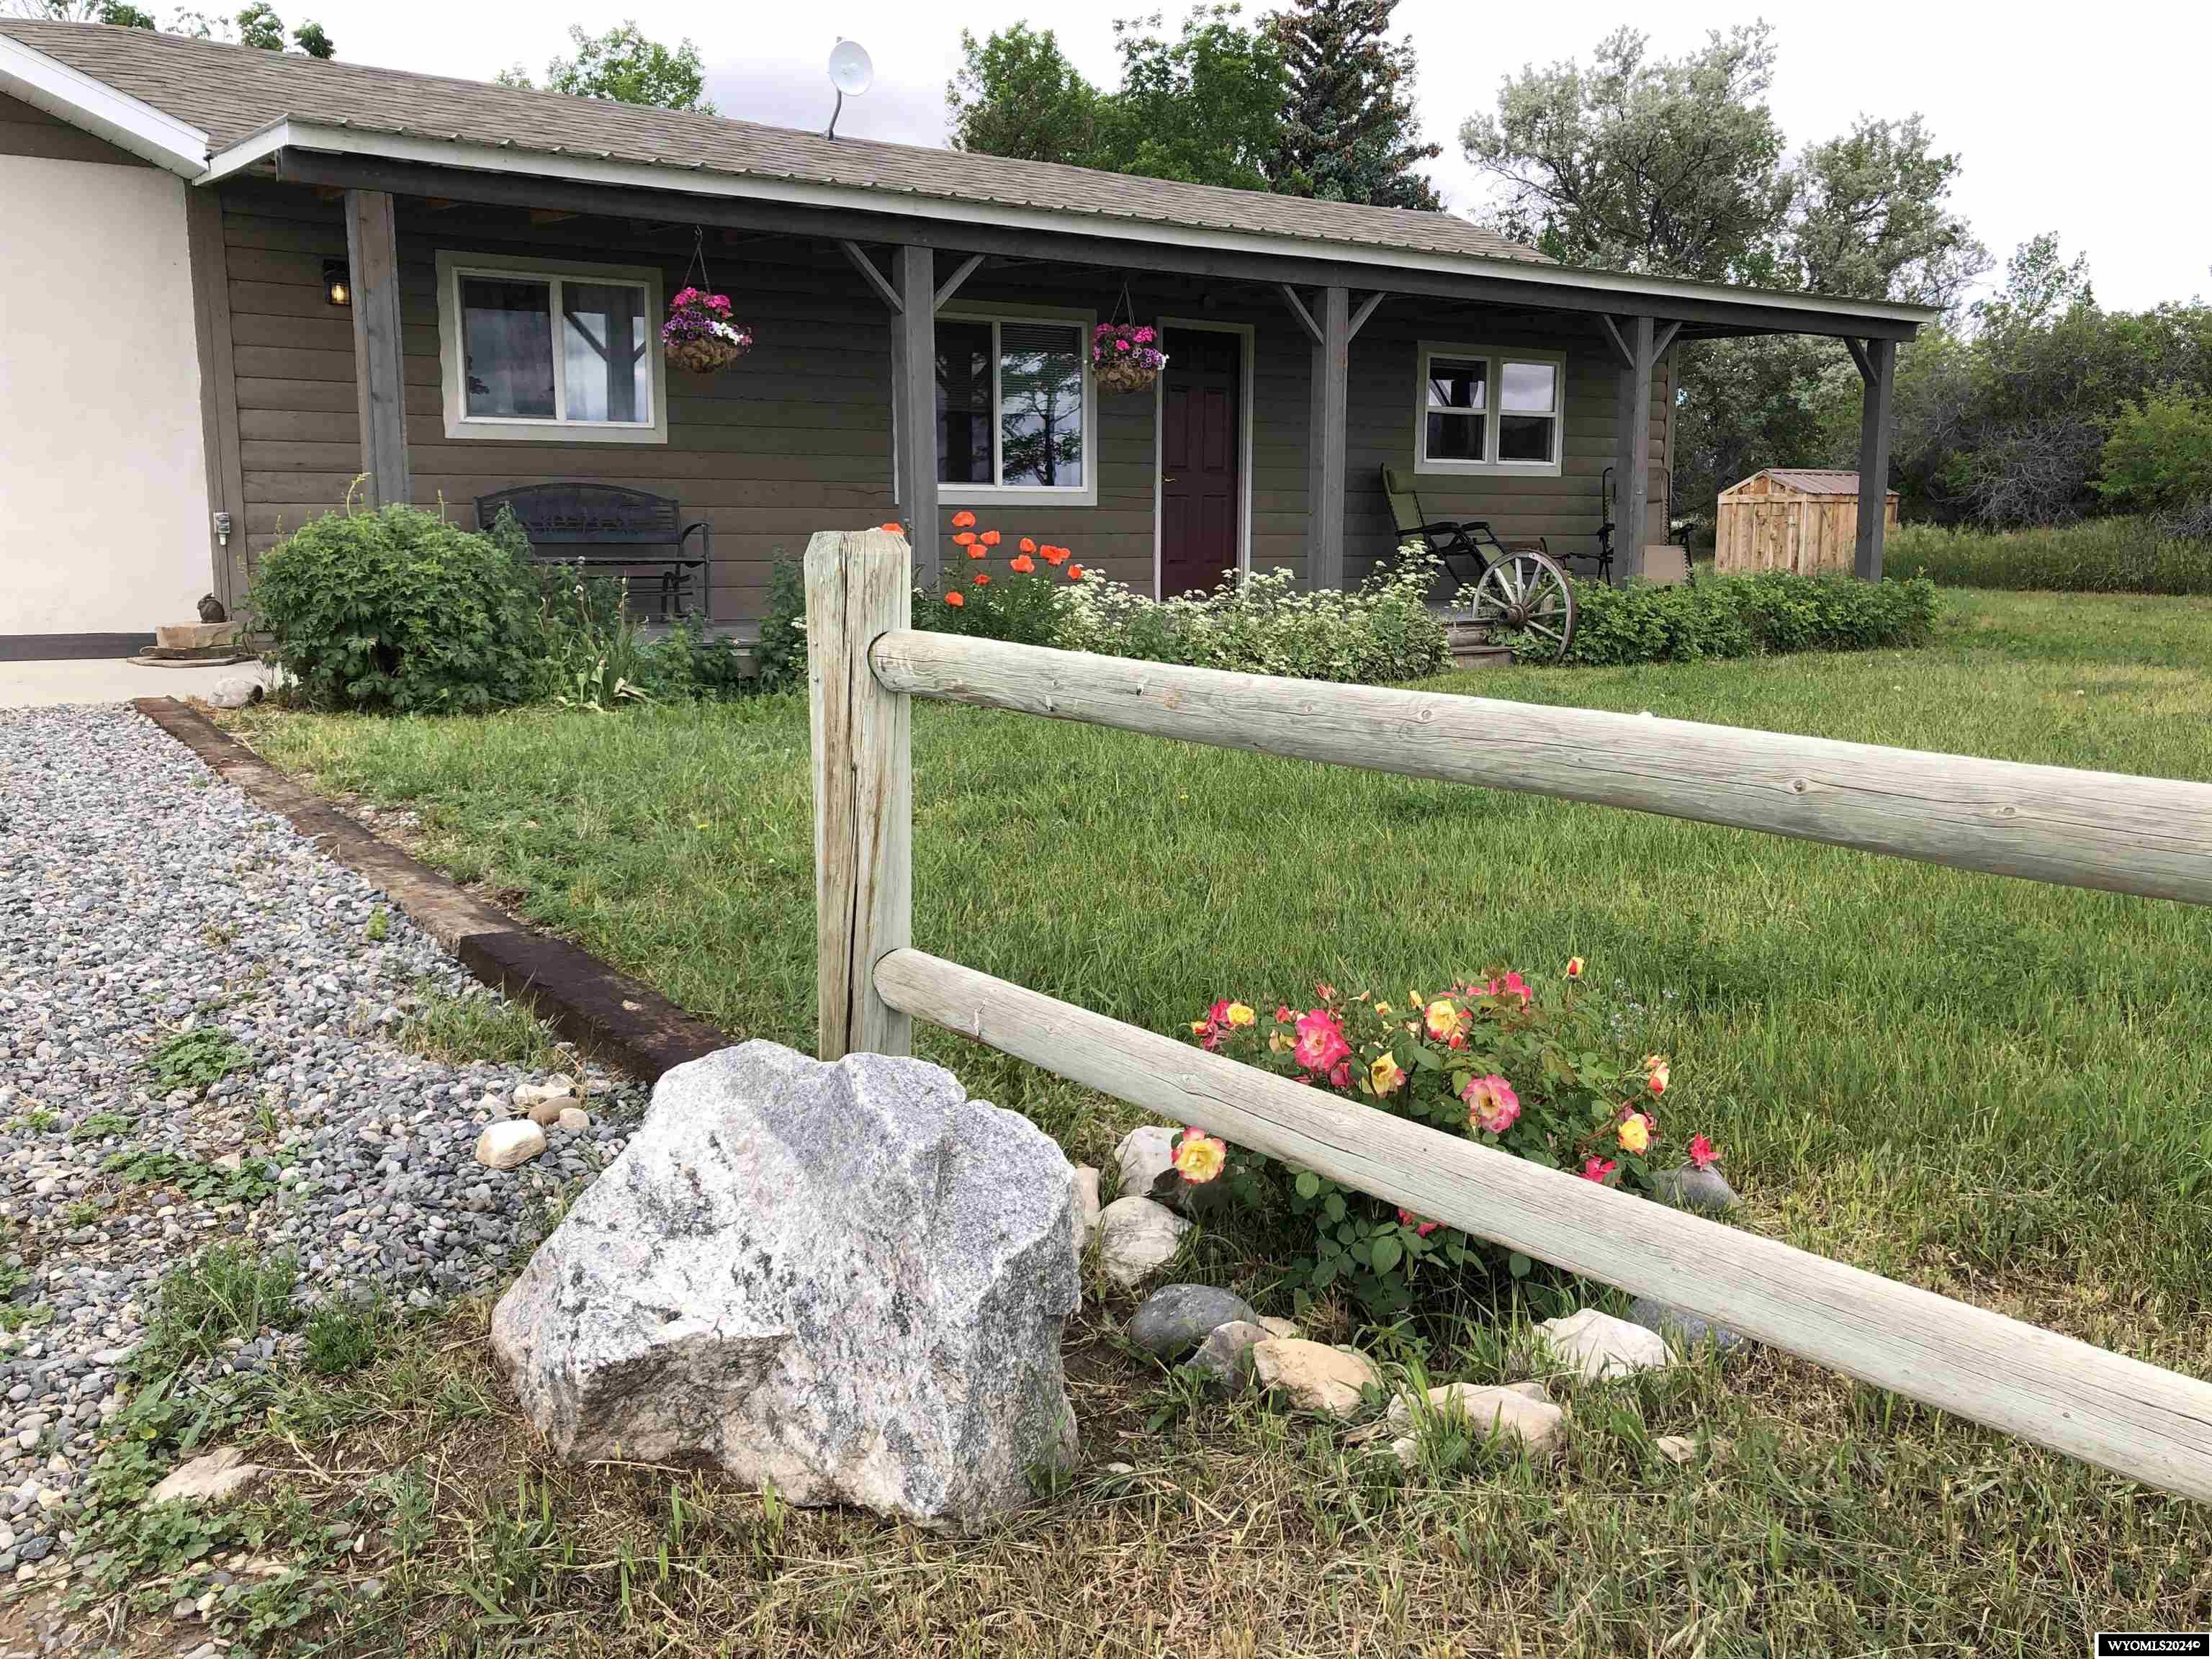 Resting near Heart Mountain, this small ranch offers a slice of Western living! The home has been recently remodeled and updated. It is a charming 1,640 sq. ft, 4 bed, 2 bath home. The seller's have rented it as an Airbnb through the summers. There is a 575 sq. ft. heated shop, 1600 sq. ft. barn with a 480 sq. ft. heated and insulated tack room/office, 800 sq. ft. livestock barn, 2 Ritchie Omni Fount for year around livestock water, and Multiple Paddock System for sorting and animal handling.There are approximately 42 acres of farm ground with around 36 in irrigated hay/pasture. Irrigation water is delivered via pressurized gated pipe completely underground from Heart Mountain Canal. This acreage is fenced for rotational grazing or haying. Located less than 30 minutes from Cody and 20 minutes from Powell you are never too far from all that these communities have to offer. 2251 Lane 9, Home -Alkali Creek Frontage -tankless hot water heater -updated electrical -updated ceiling insulation in March 2024 575 sq. ft. heated & insulated shop with enclosed office 1600 sq. ft. barn with 480 sq. ft. heated Office/Workspace/Hobby Space - heated space is insulated both walls and ceiling, insulated in spring 2024 800 sq. ft. livestock barn -mostly concrete floor and lighting -insulated approximately 36 sq. ft. chicken coop with automatic door opener - 2 Ritchie Omni Fount waters for year around livestock water -Multiple Paddock system for sorting and Animal Handling -Privacy and wind fence along back of corral area